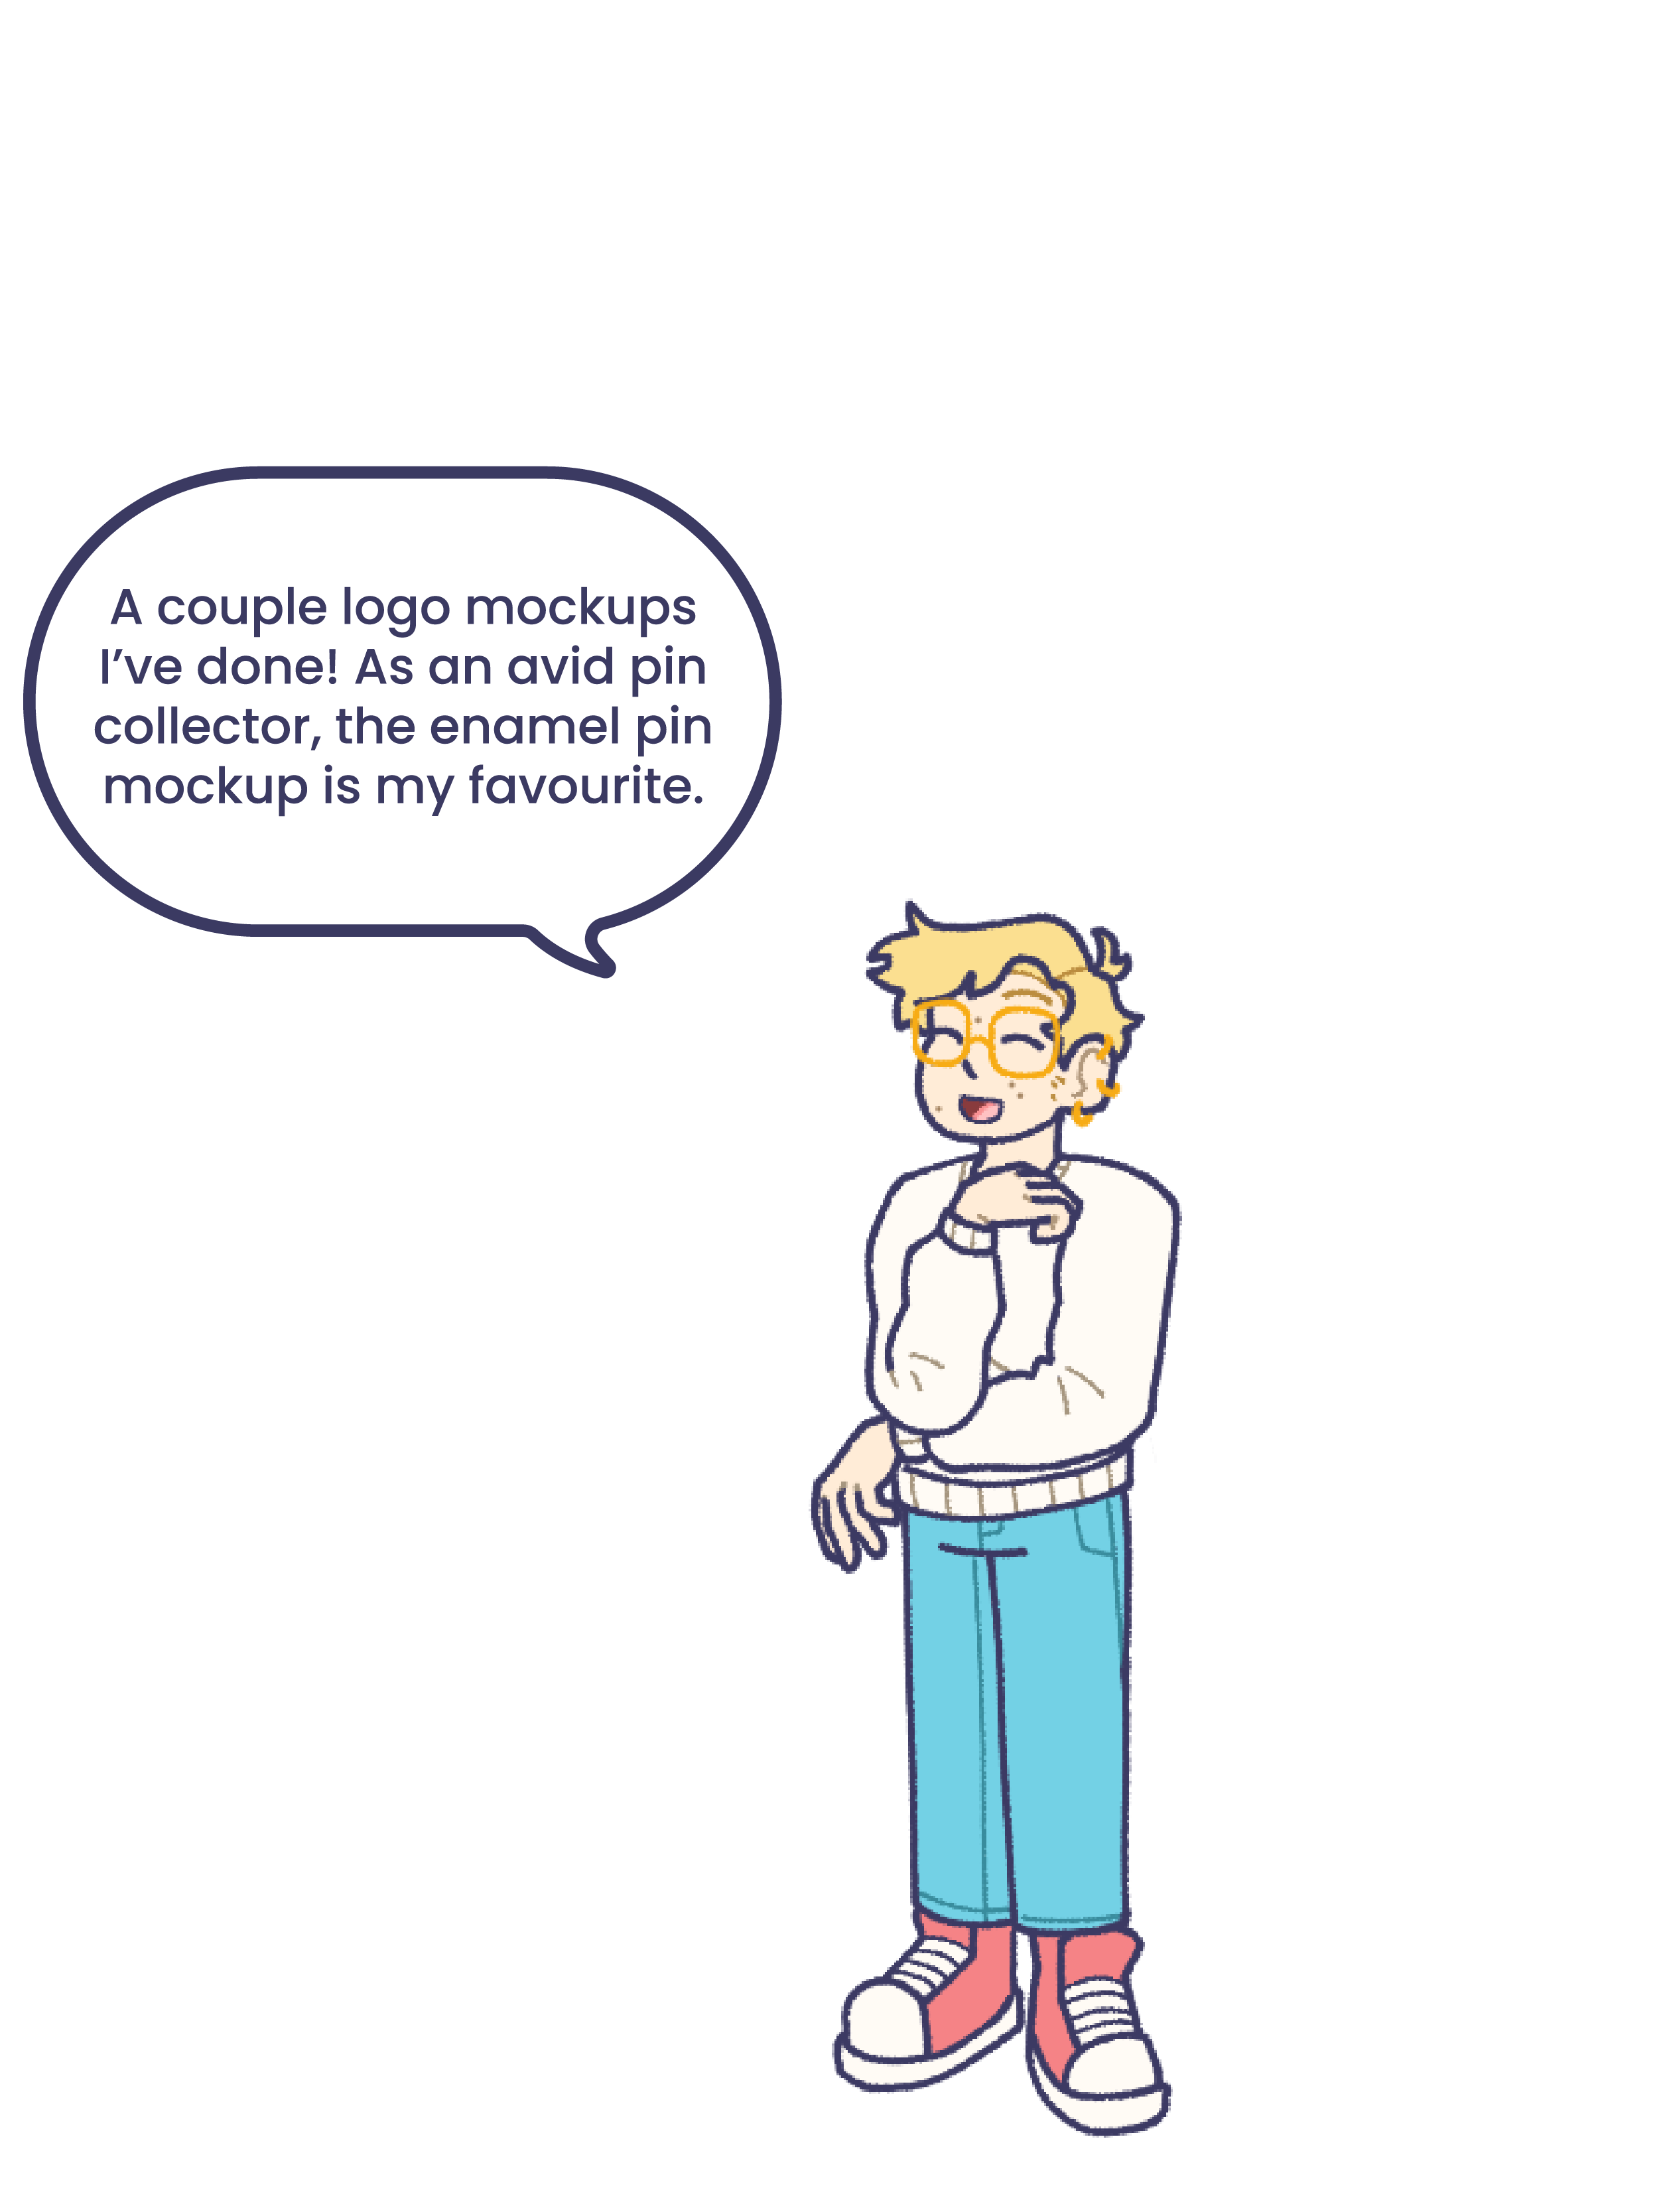 An illustration of me, with a text bubble that reads: A couple of logo mockups I've done! As an avid pin collector, the enamel pin mockup is my favourite.